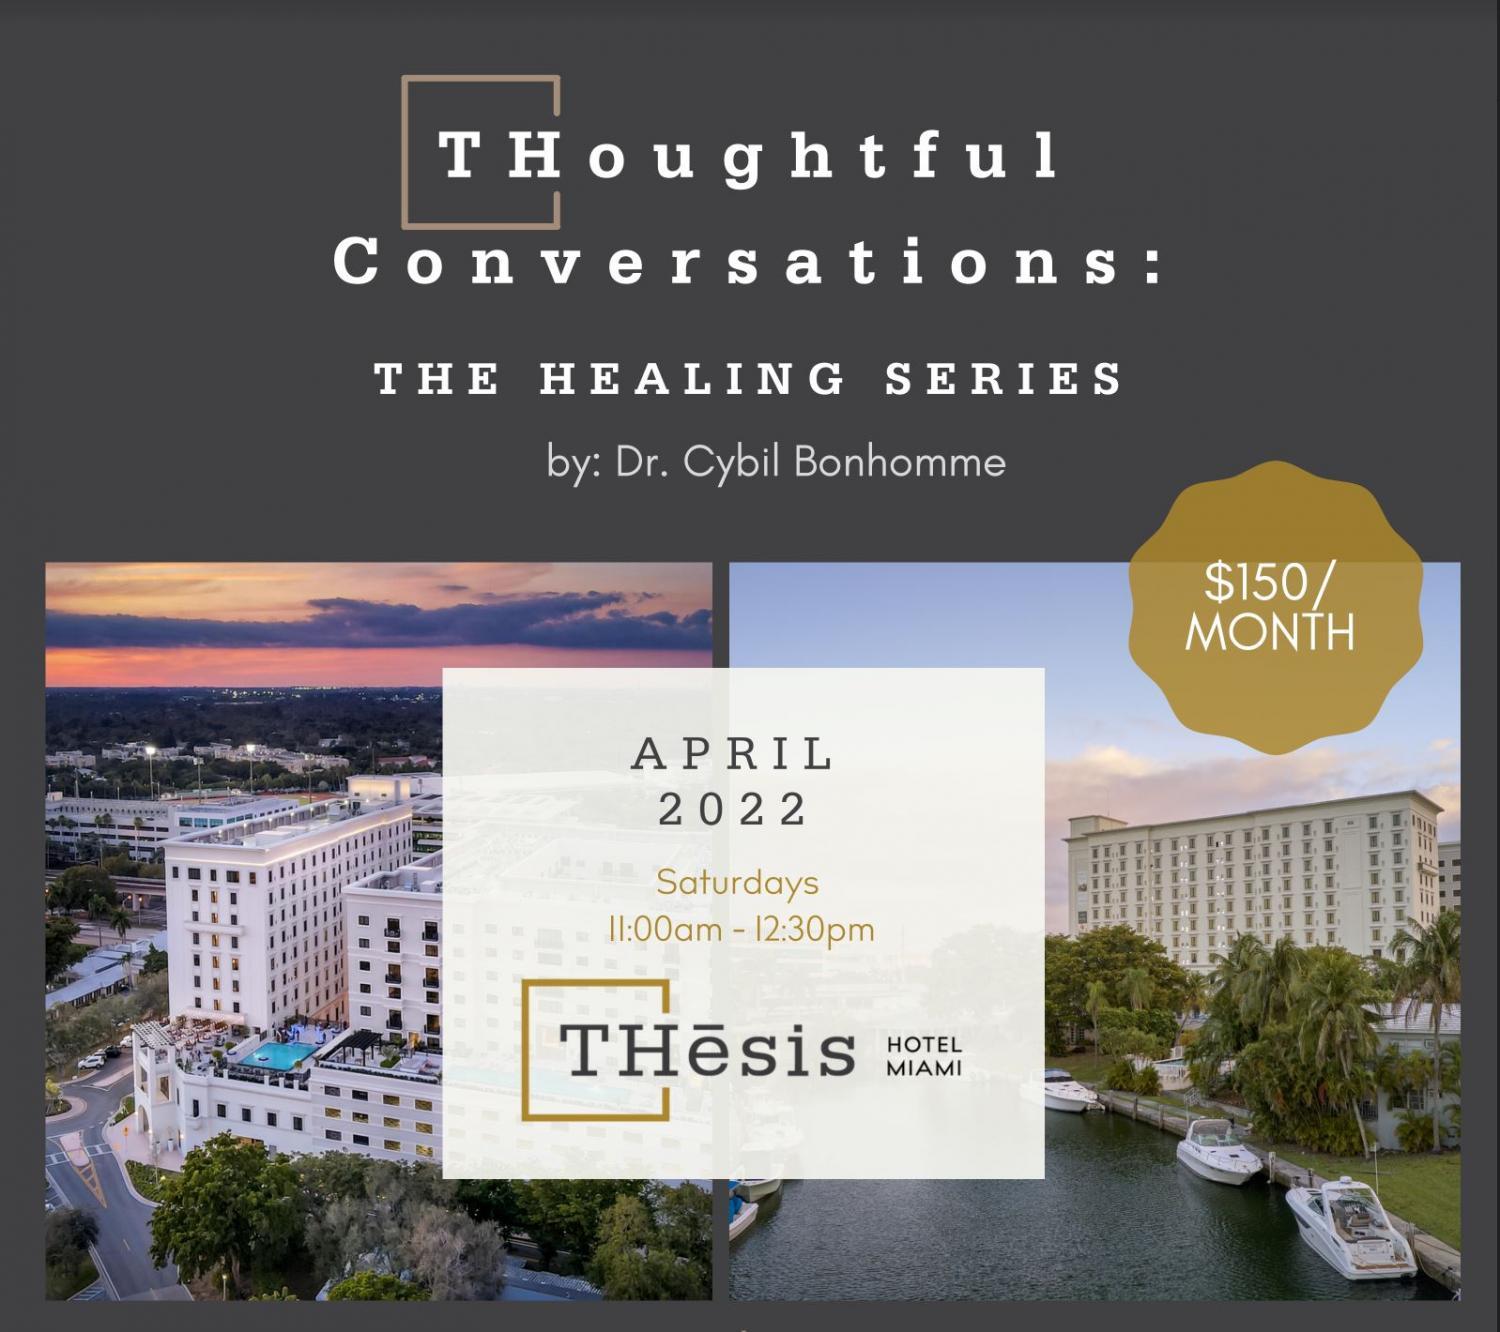 THoughtful Conversations: The Healing Series @ THesis Hotel